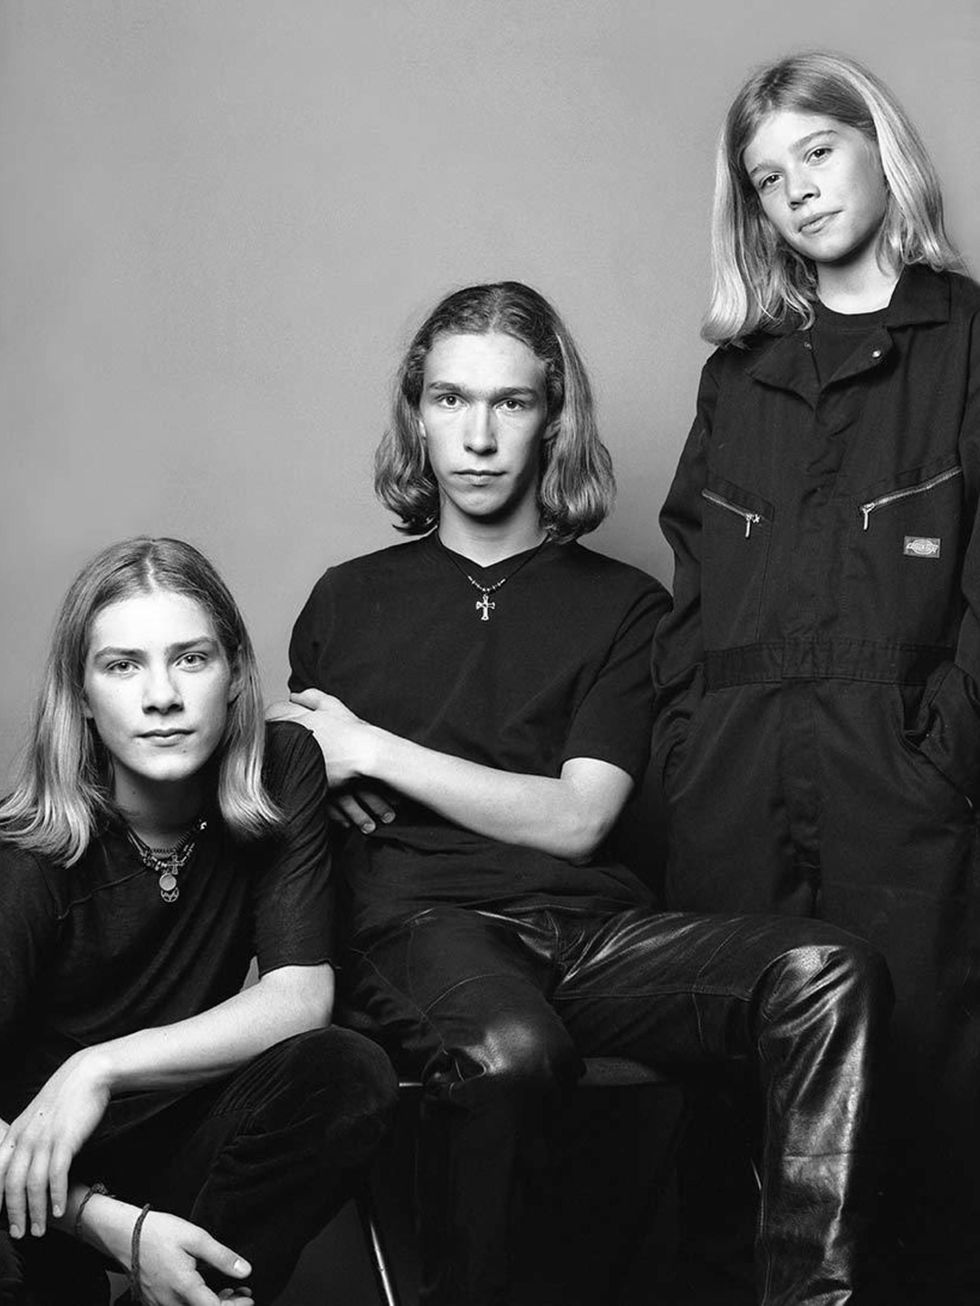 Hanson

MMMBop your way to the nearest salon and request a mid-length haircut like Hanson's - it's the cut of the season and they were WAY ahead of the game.